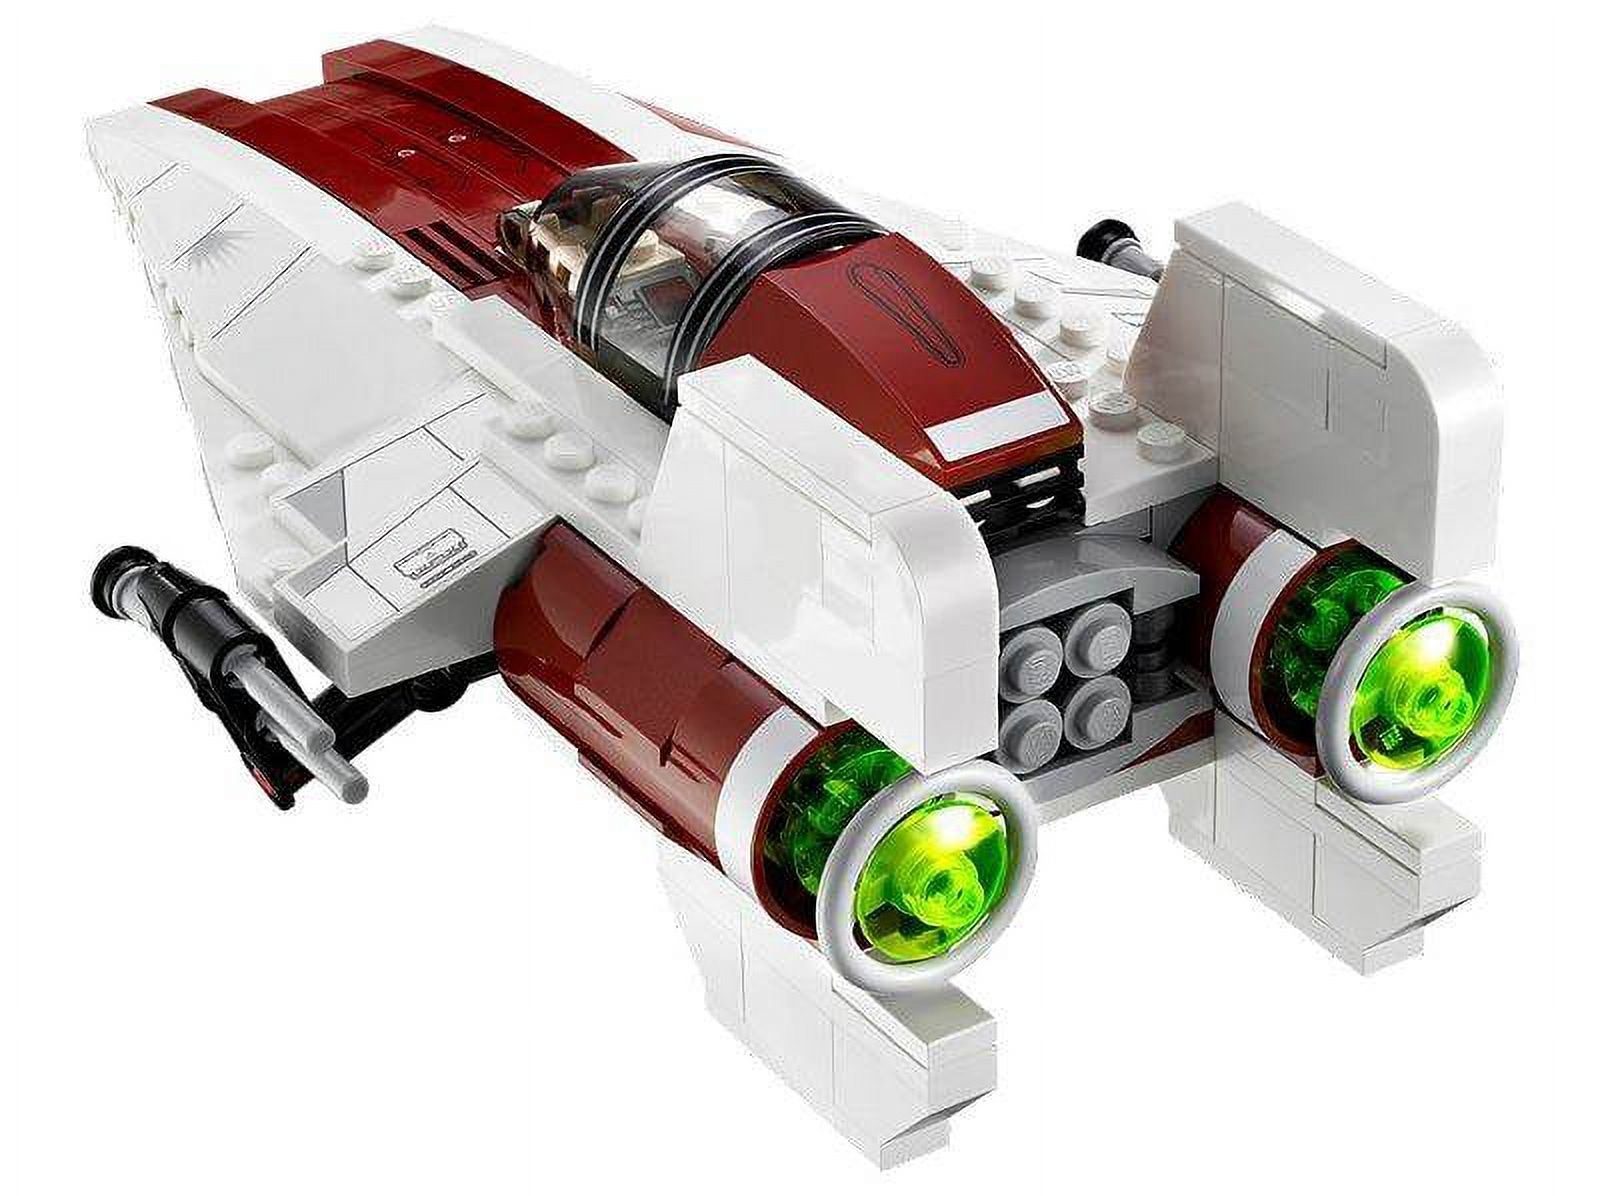 LEGO Star Wars A-wing Starfighter Play Set - image 3 of 7